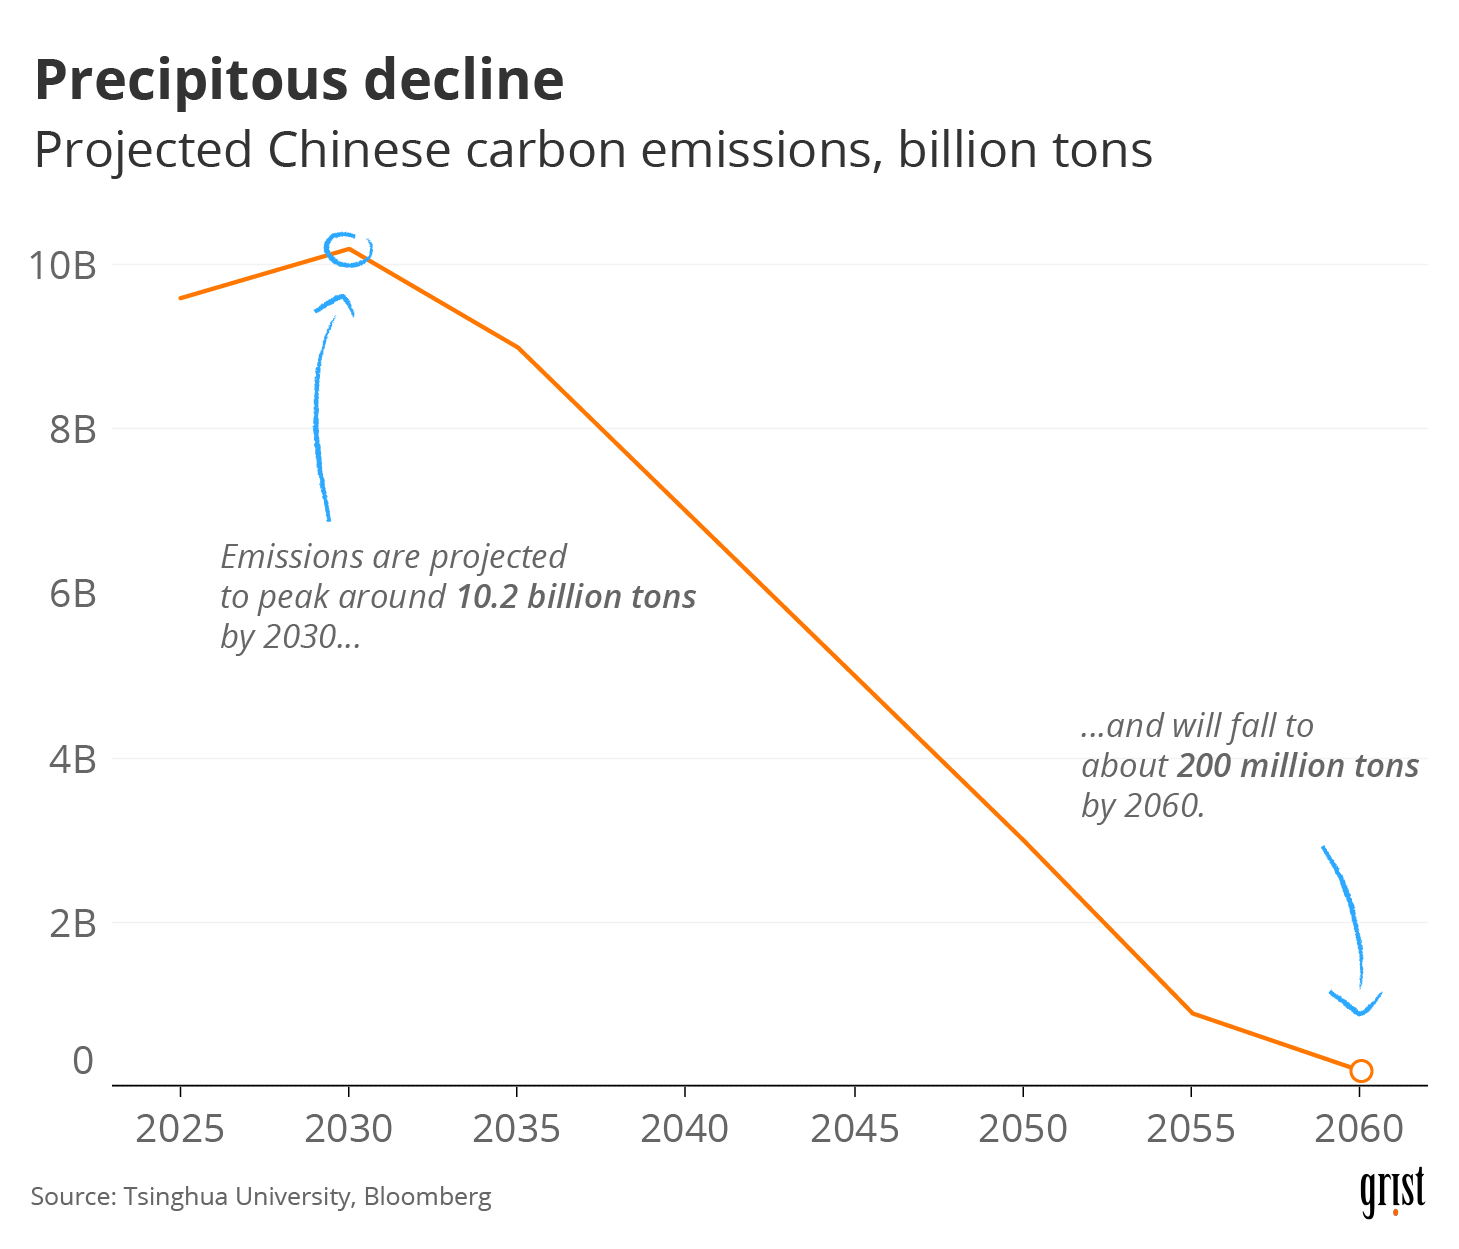 A line chart showing declining Chinese carbon emissions through 2060. China predicts their emissions to peak by 2030 (around 10.2 billion tons) and drop to about 200 million tons by 2060.